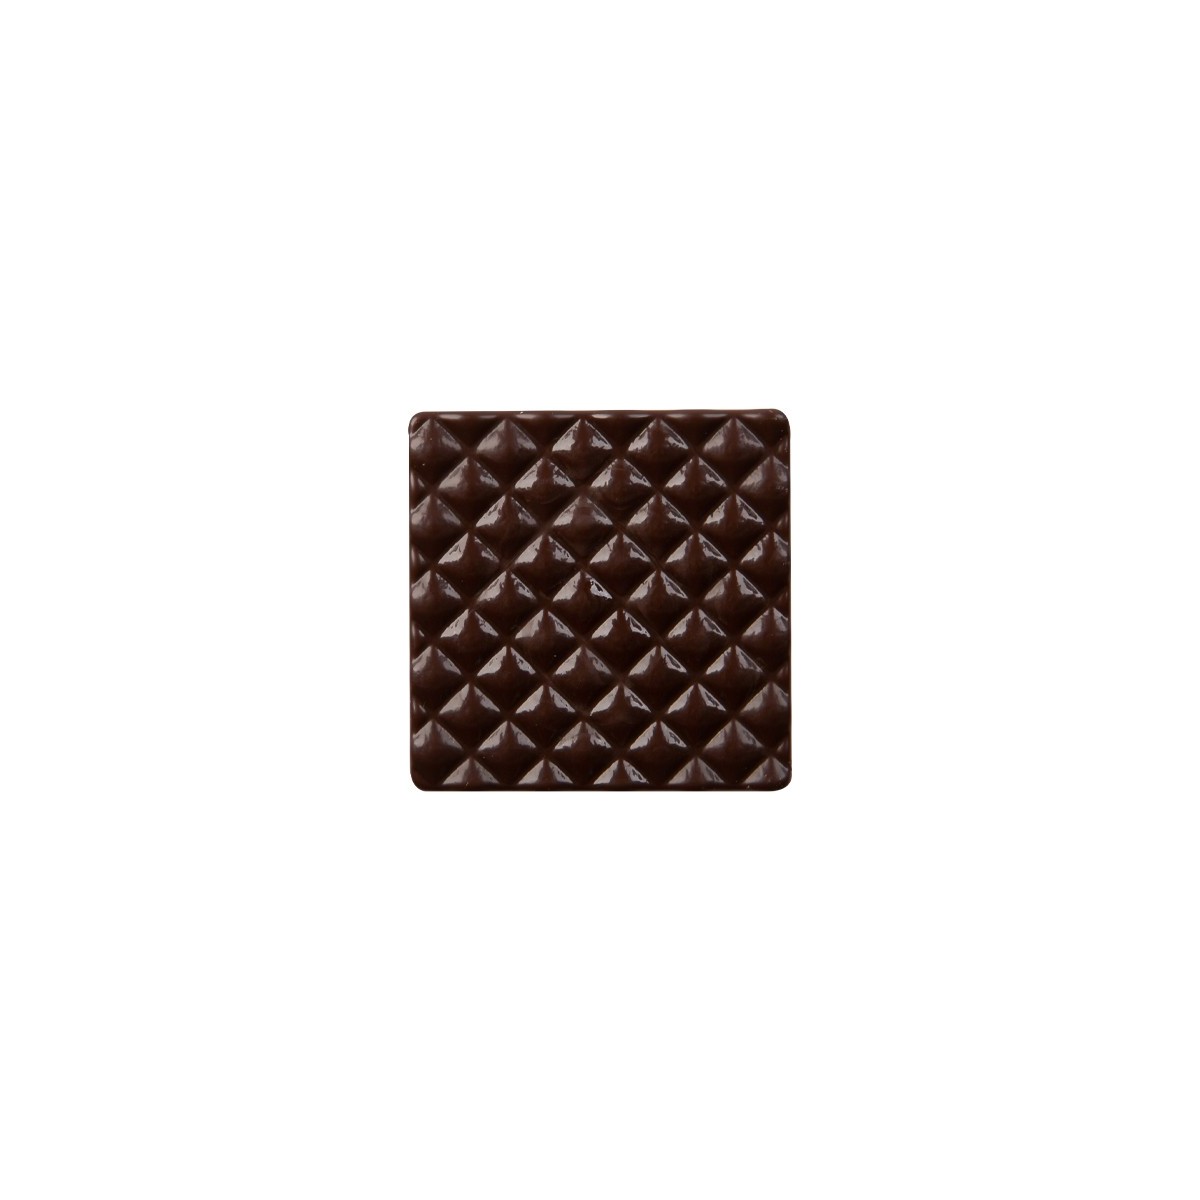 15638 MINI SQUARE LOG END WITH CHOCOLATE BLACK RELIEF 5X5CM 75PCES ON/ORDER